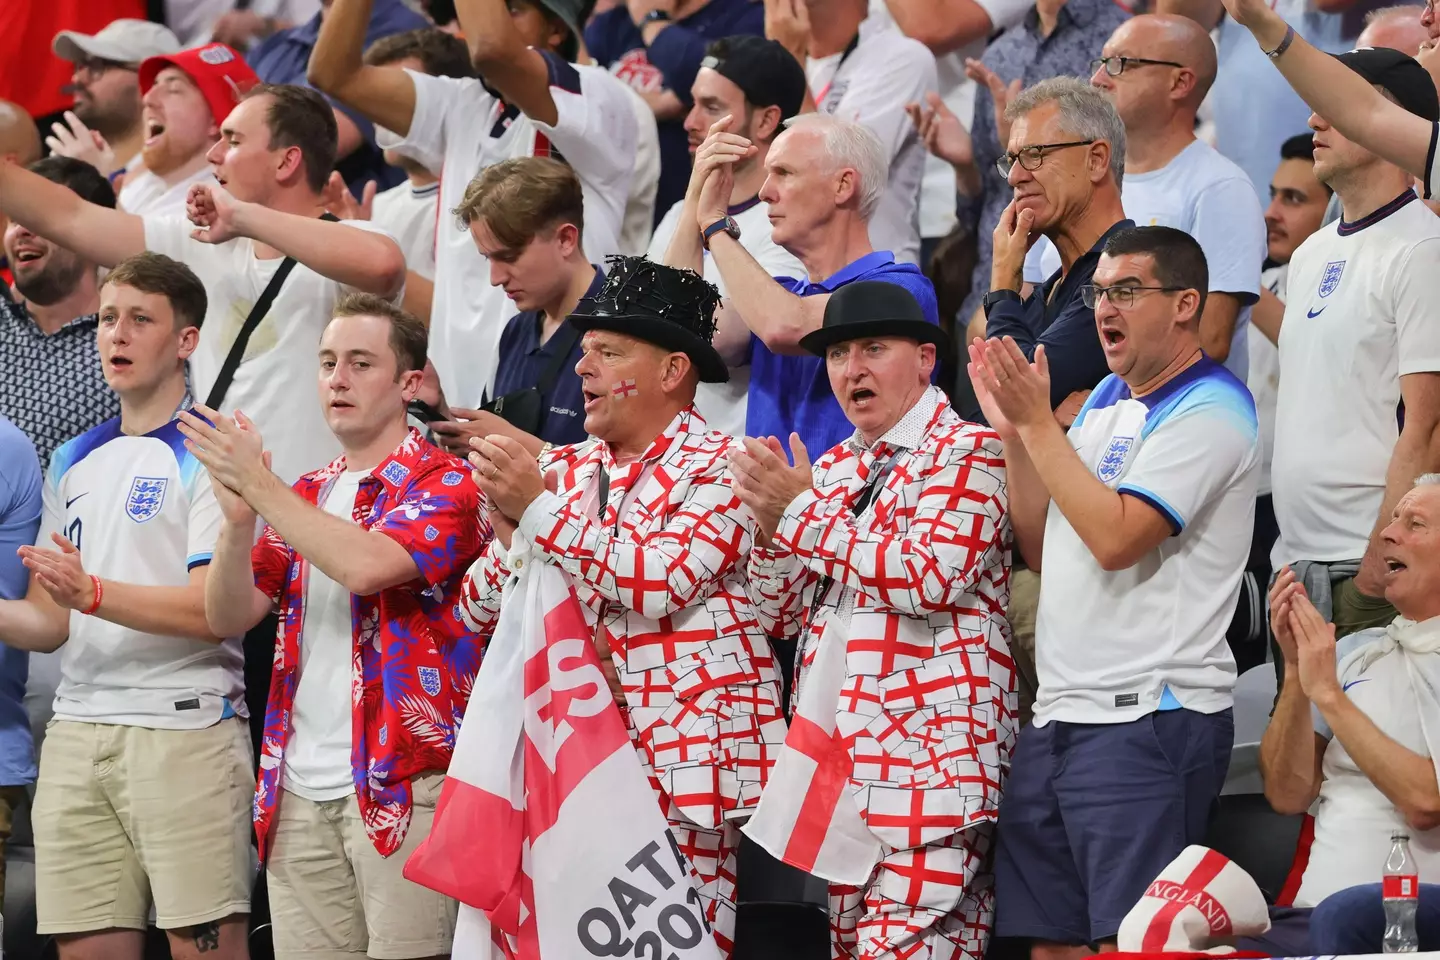 England supporters pictured in Qatar. (Image